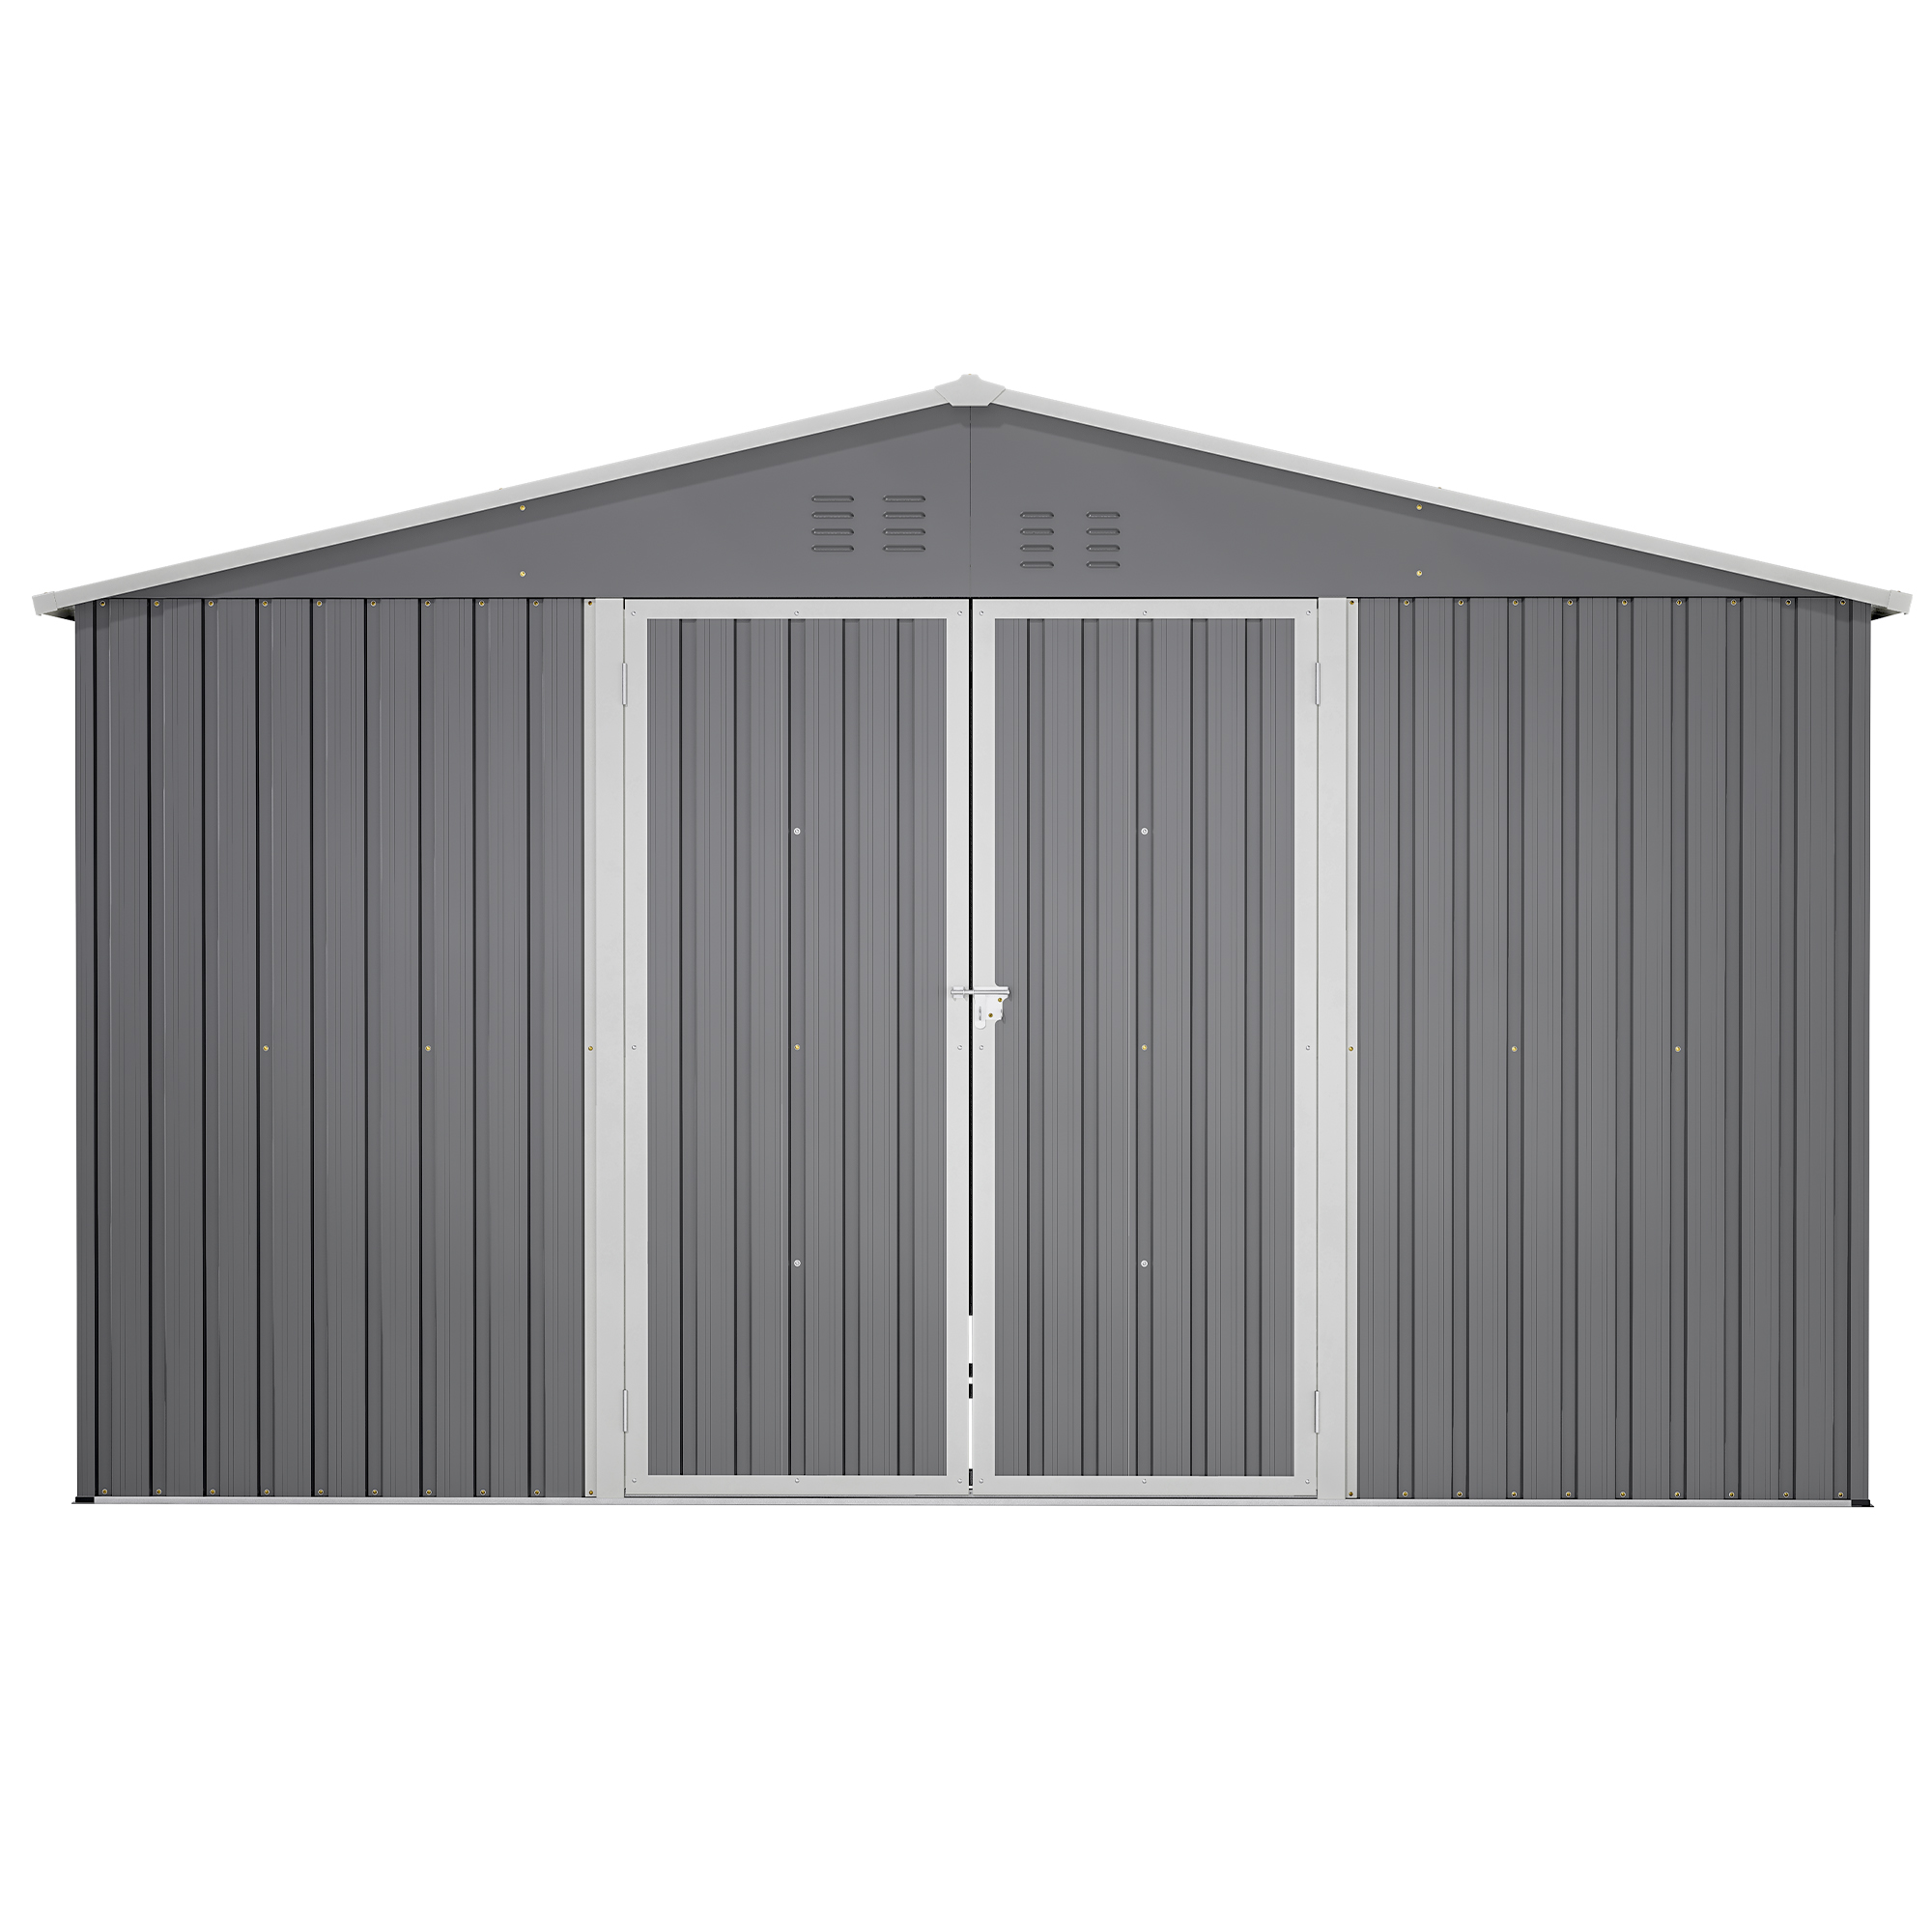 LZBEITEM 11 x 13 ft. Outdoor Metal Storage Shed with Floor Frame Kit, Galvanized Steel Garden Shed, Metal Garden Tool Shed with Lockable for Backyard Patio, Gray, 133.68 x 161.4 x 80.76 in，140.5 sq ft - image 4 of 13